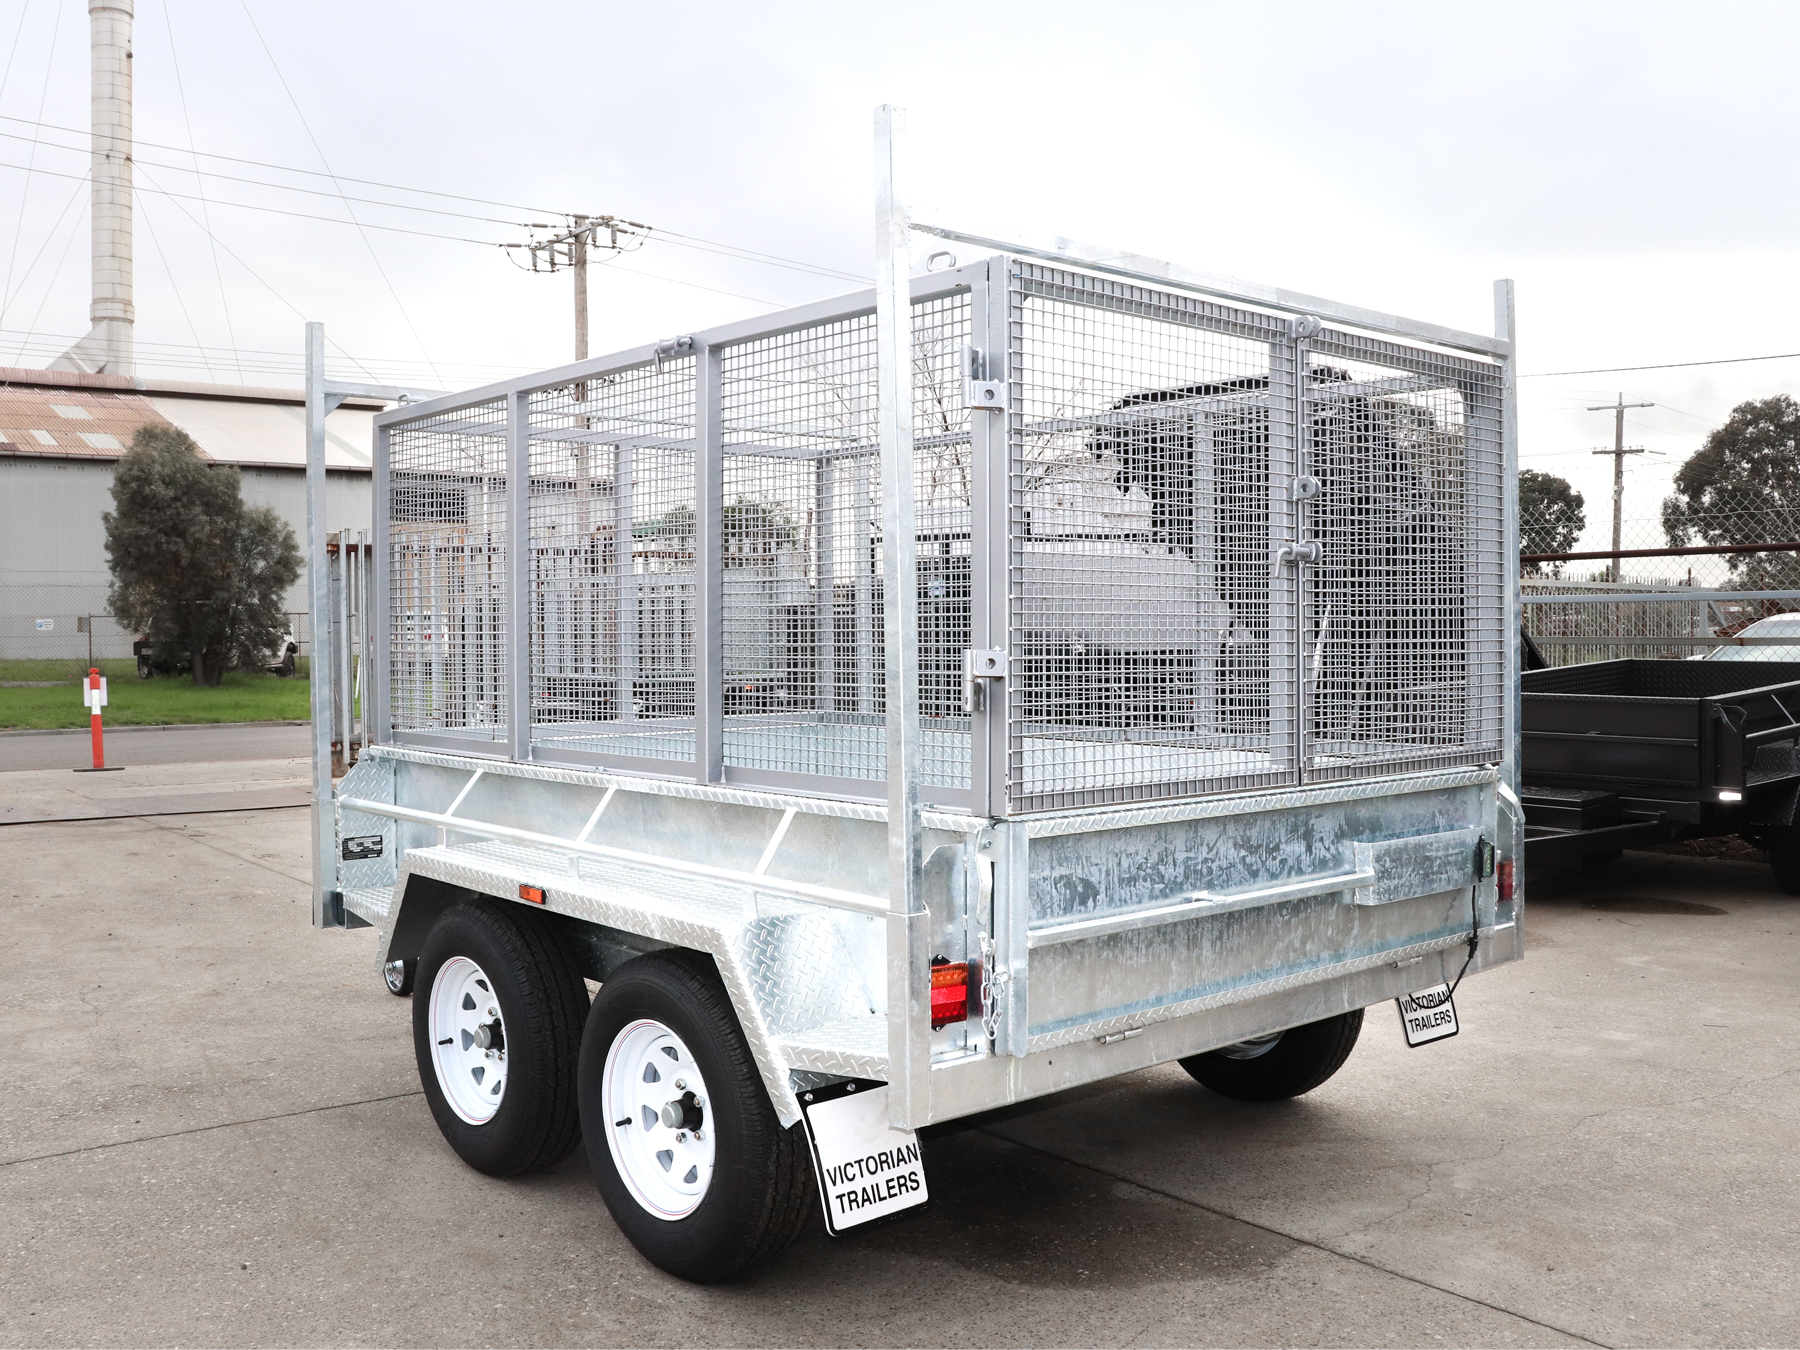 8x5 Australian Made Caged Trailer with Ladder Racks